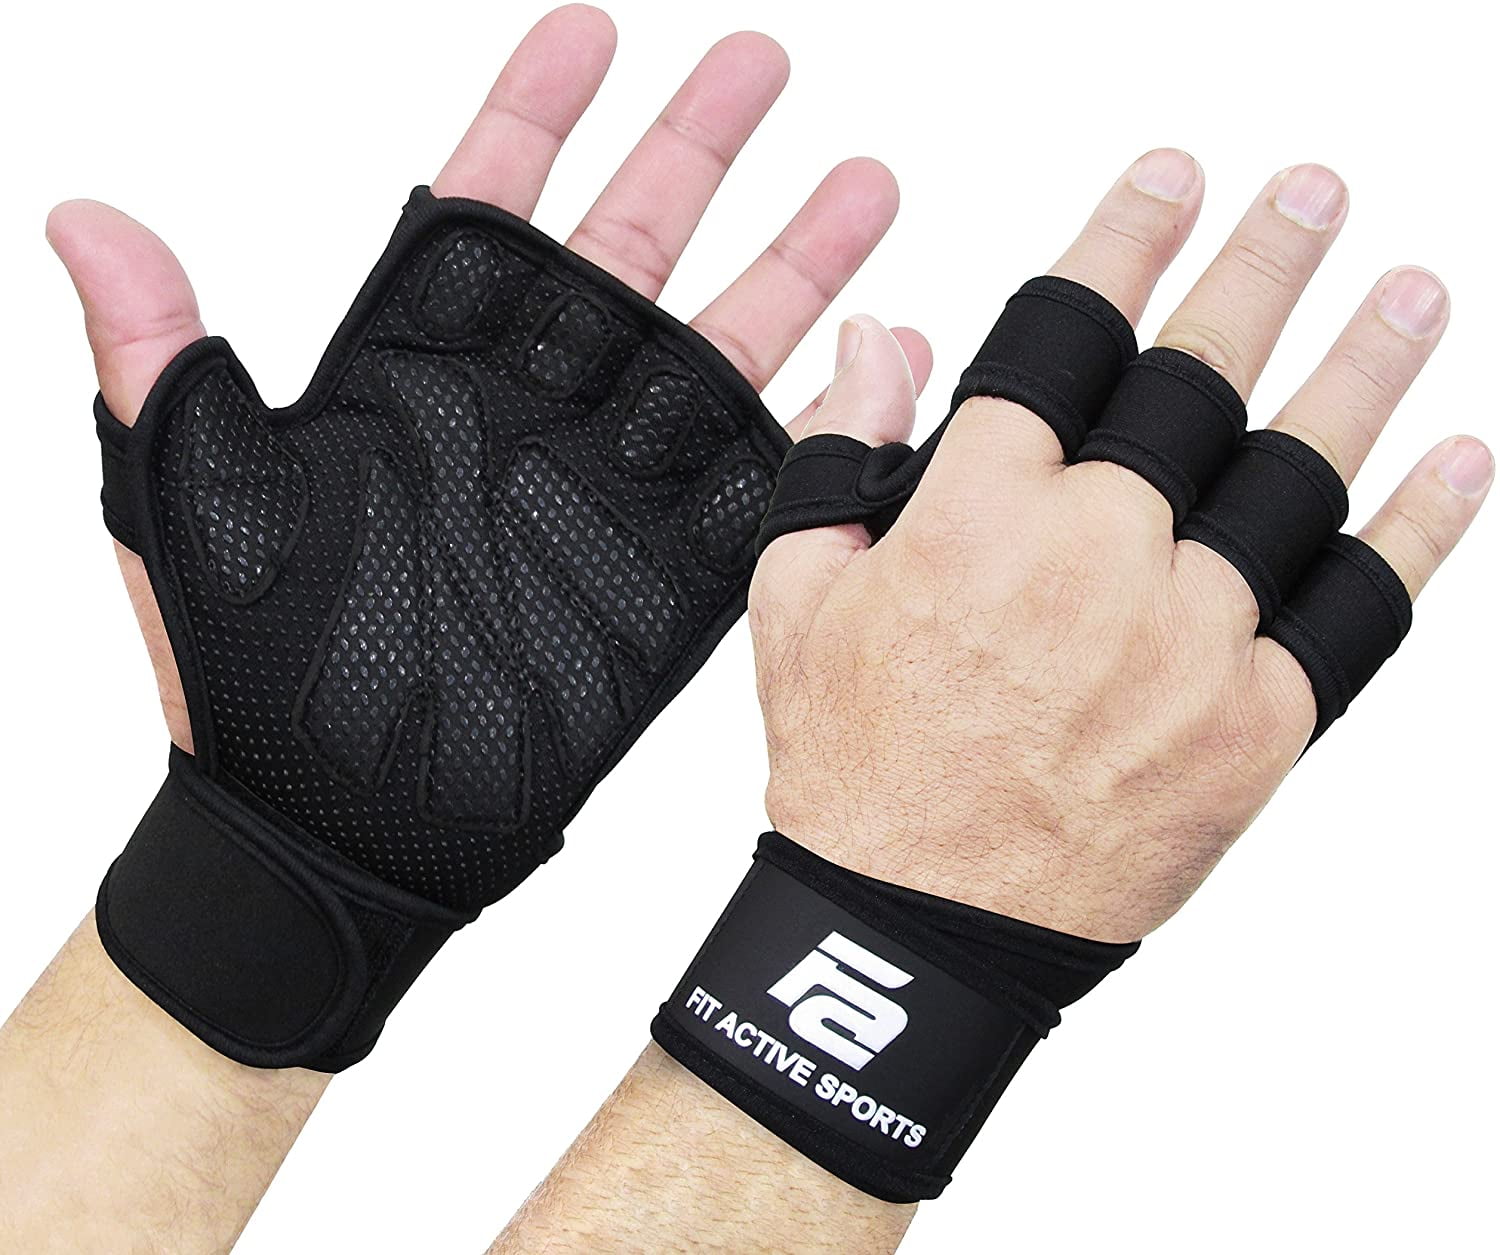 Maxx Padded Weight Lifting Training Gym Straps Hand Bar Wrist Support Glove Wrap 